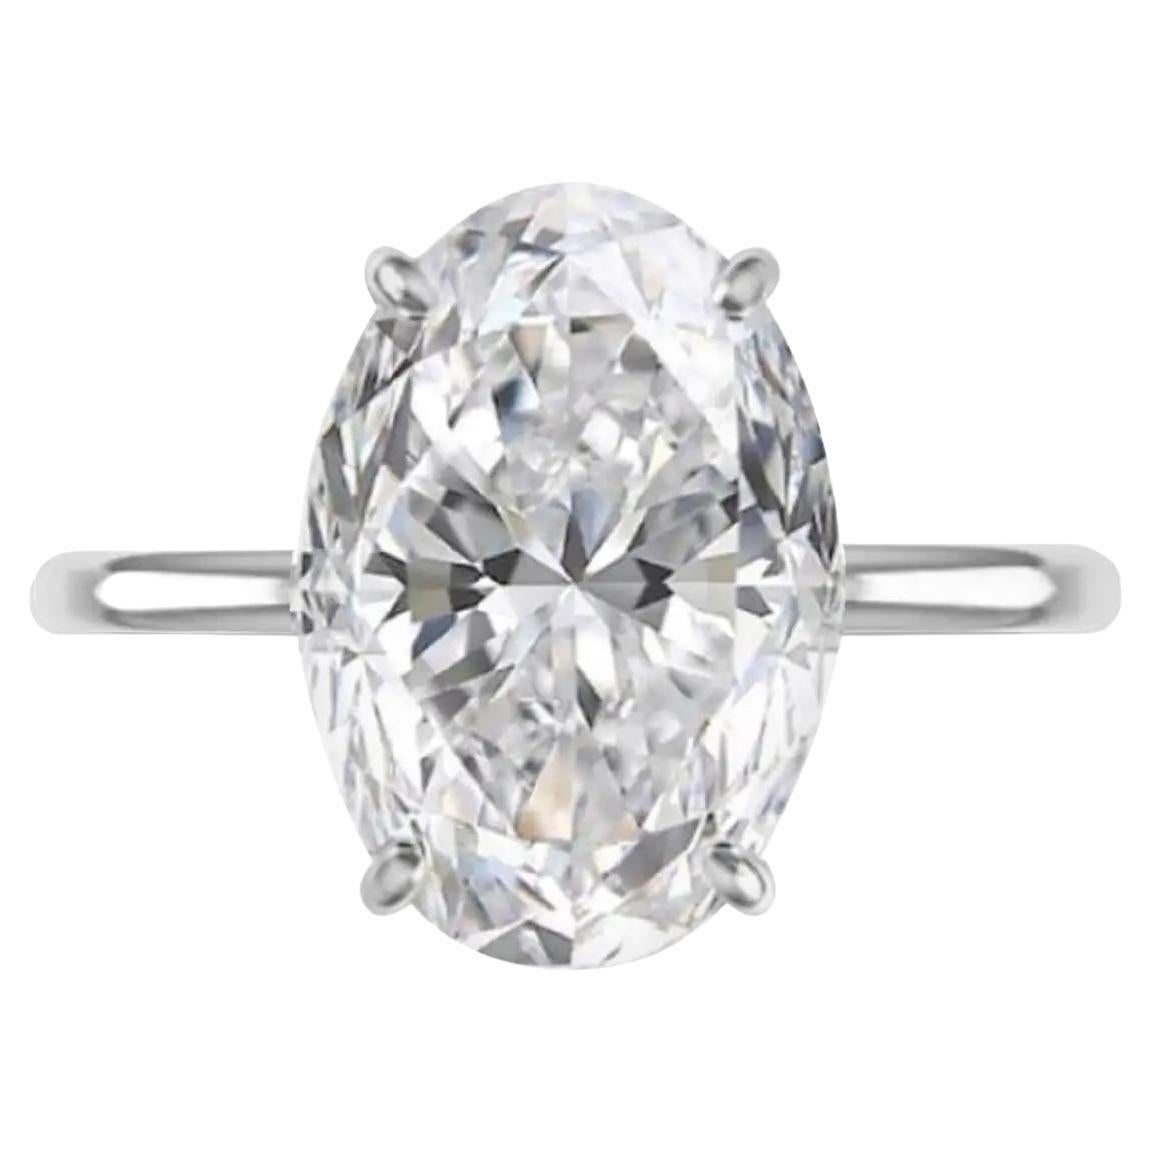  3.00 Ct Exceptional GIA Certified Oval Diamond Ring 